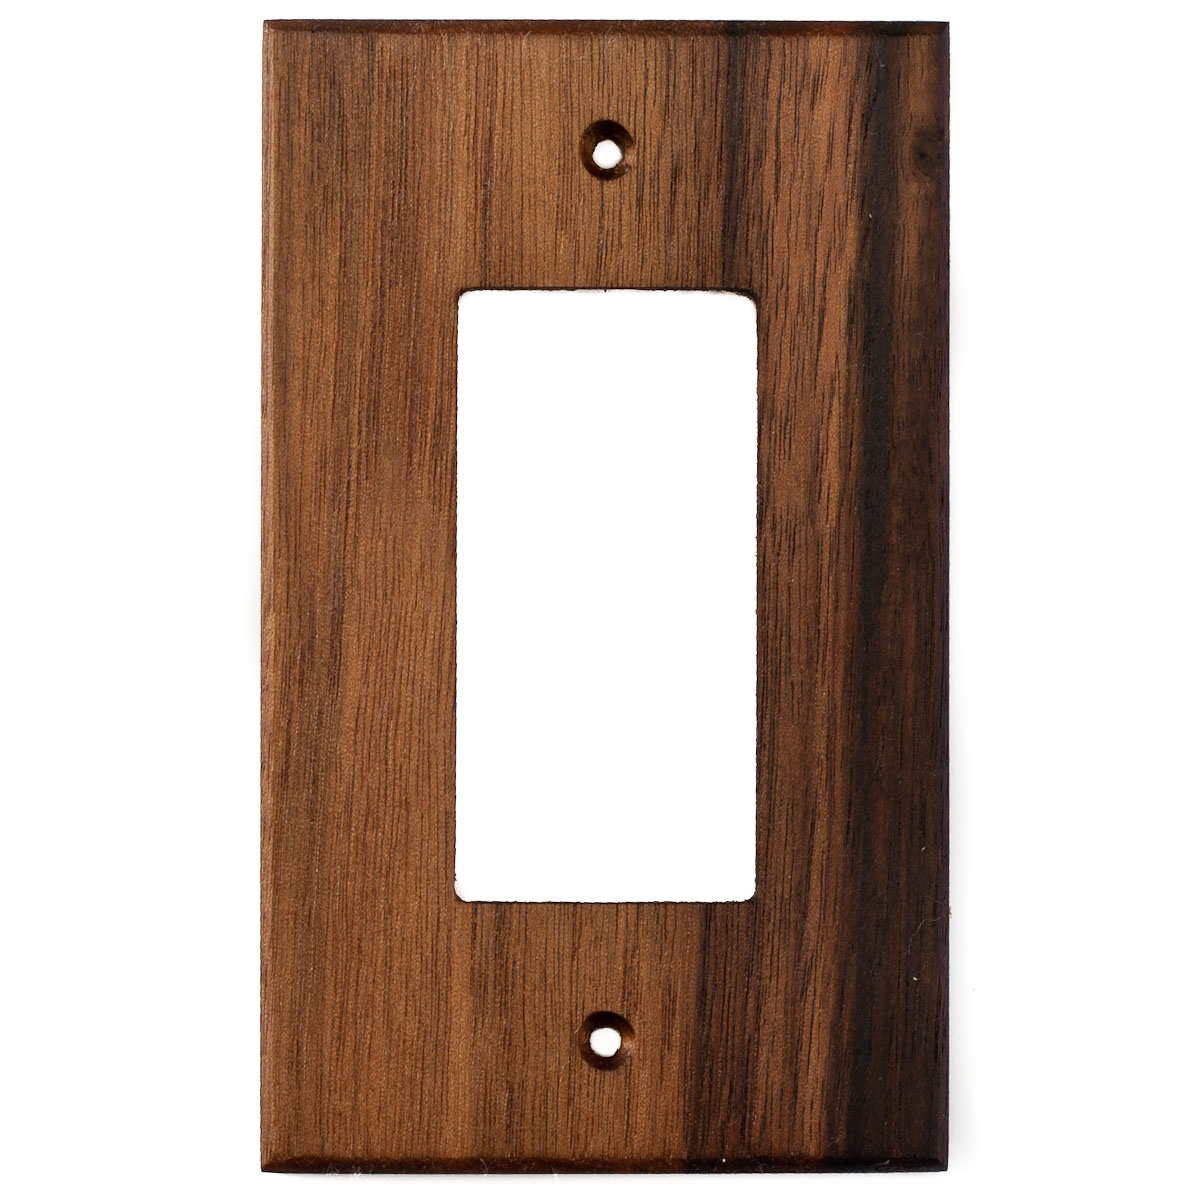 Black Walnut Wood Wall Plate - 1 Gang GFCI Outlet Cover - Virgin